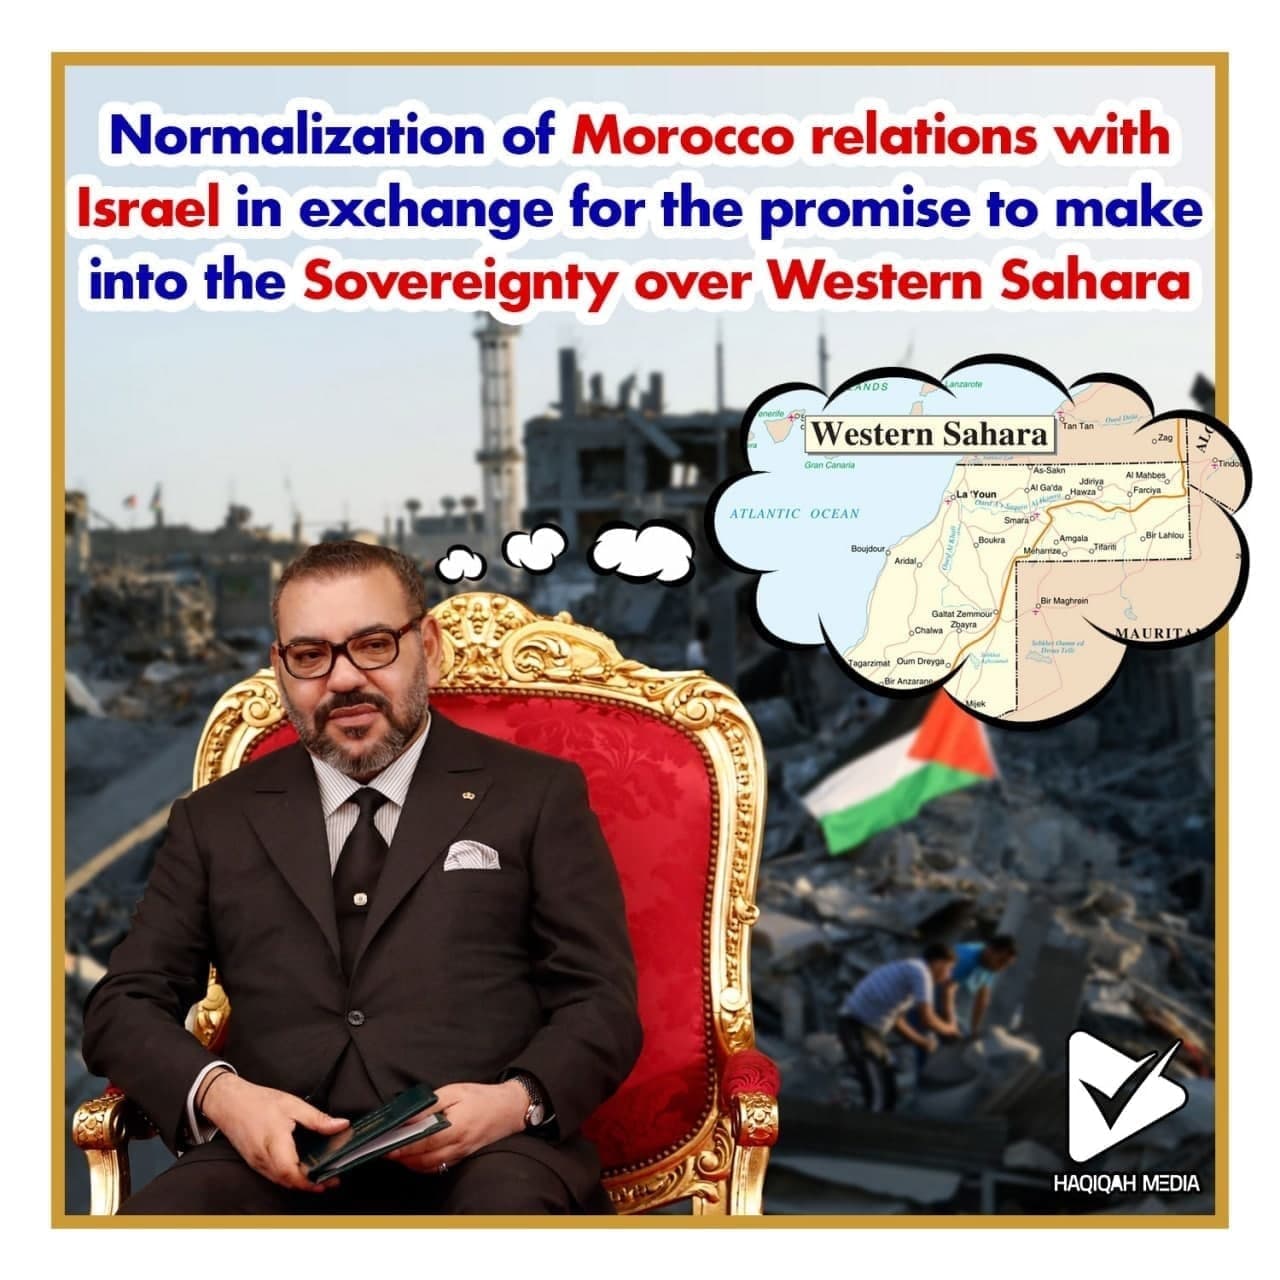 Normalization of Morocco relations with Israel in exchange for the promise to make into the Sovereignty over Western Sahara